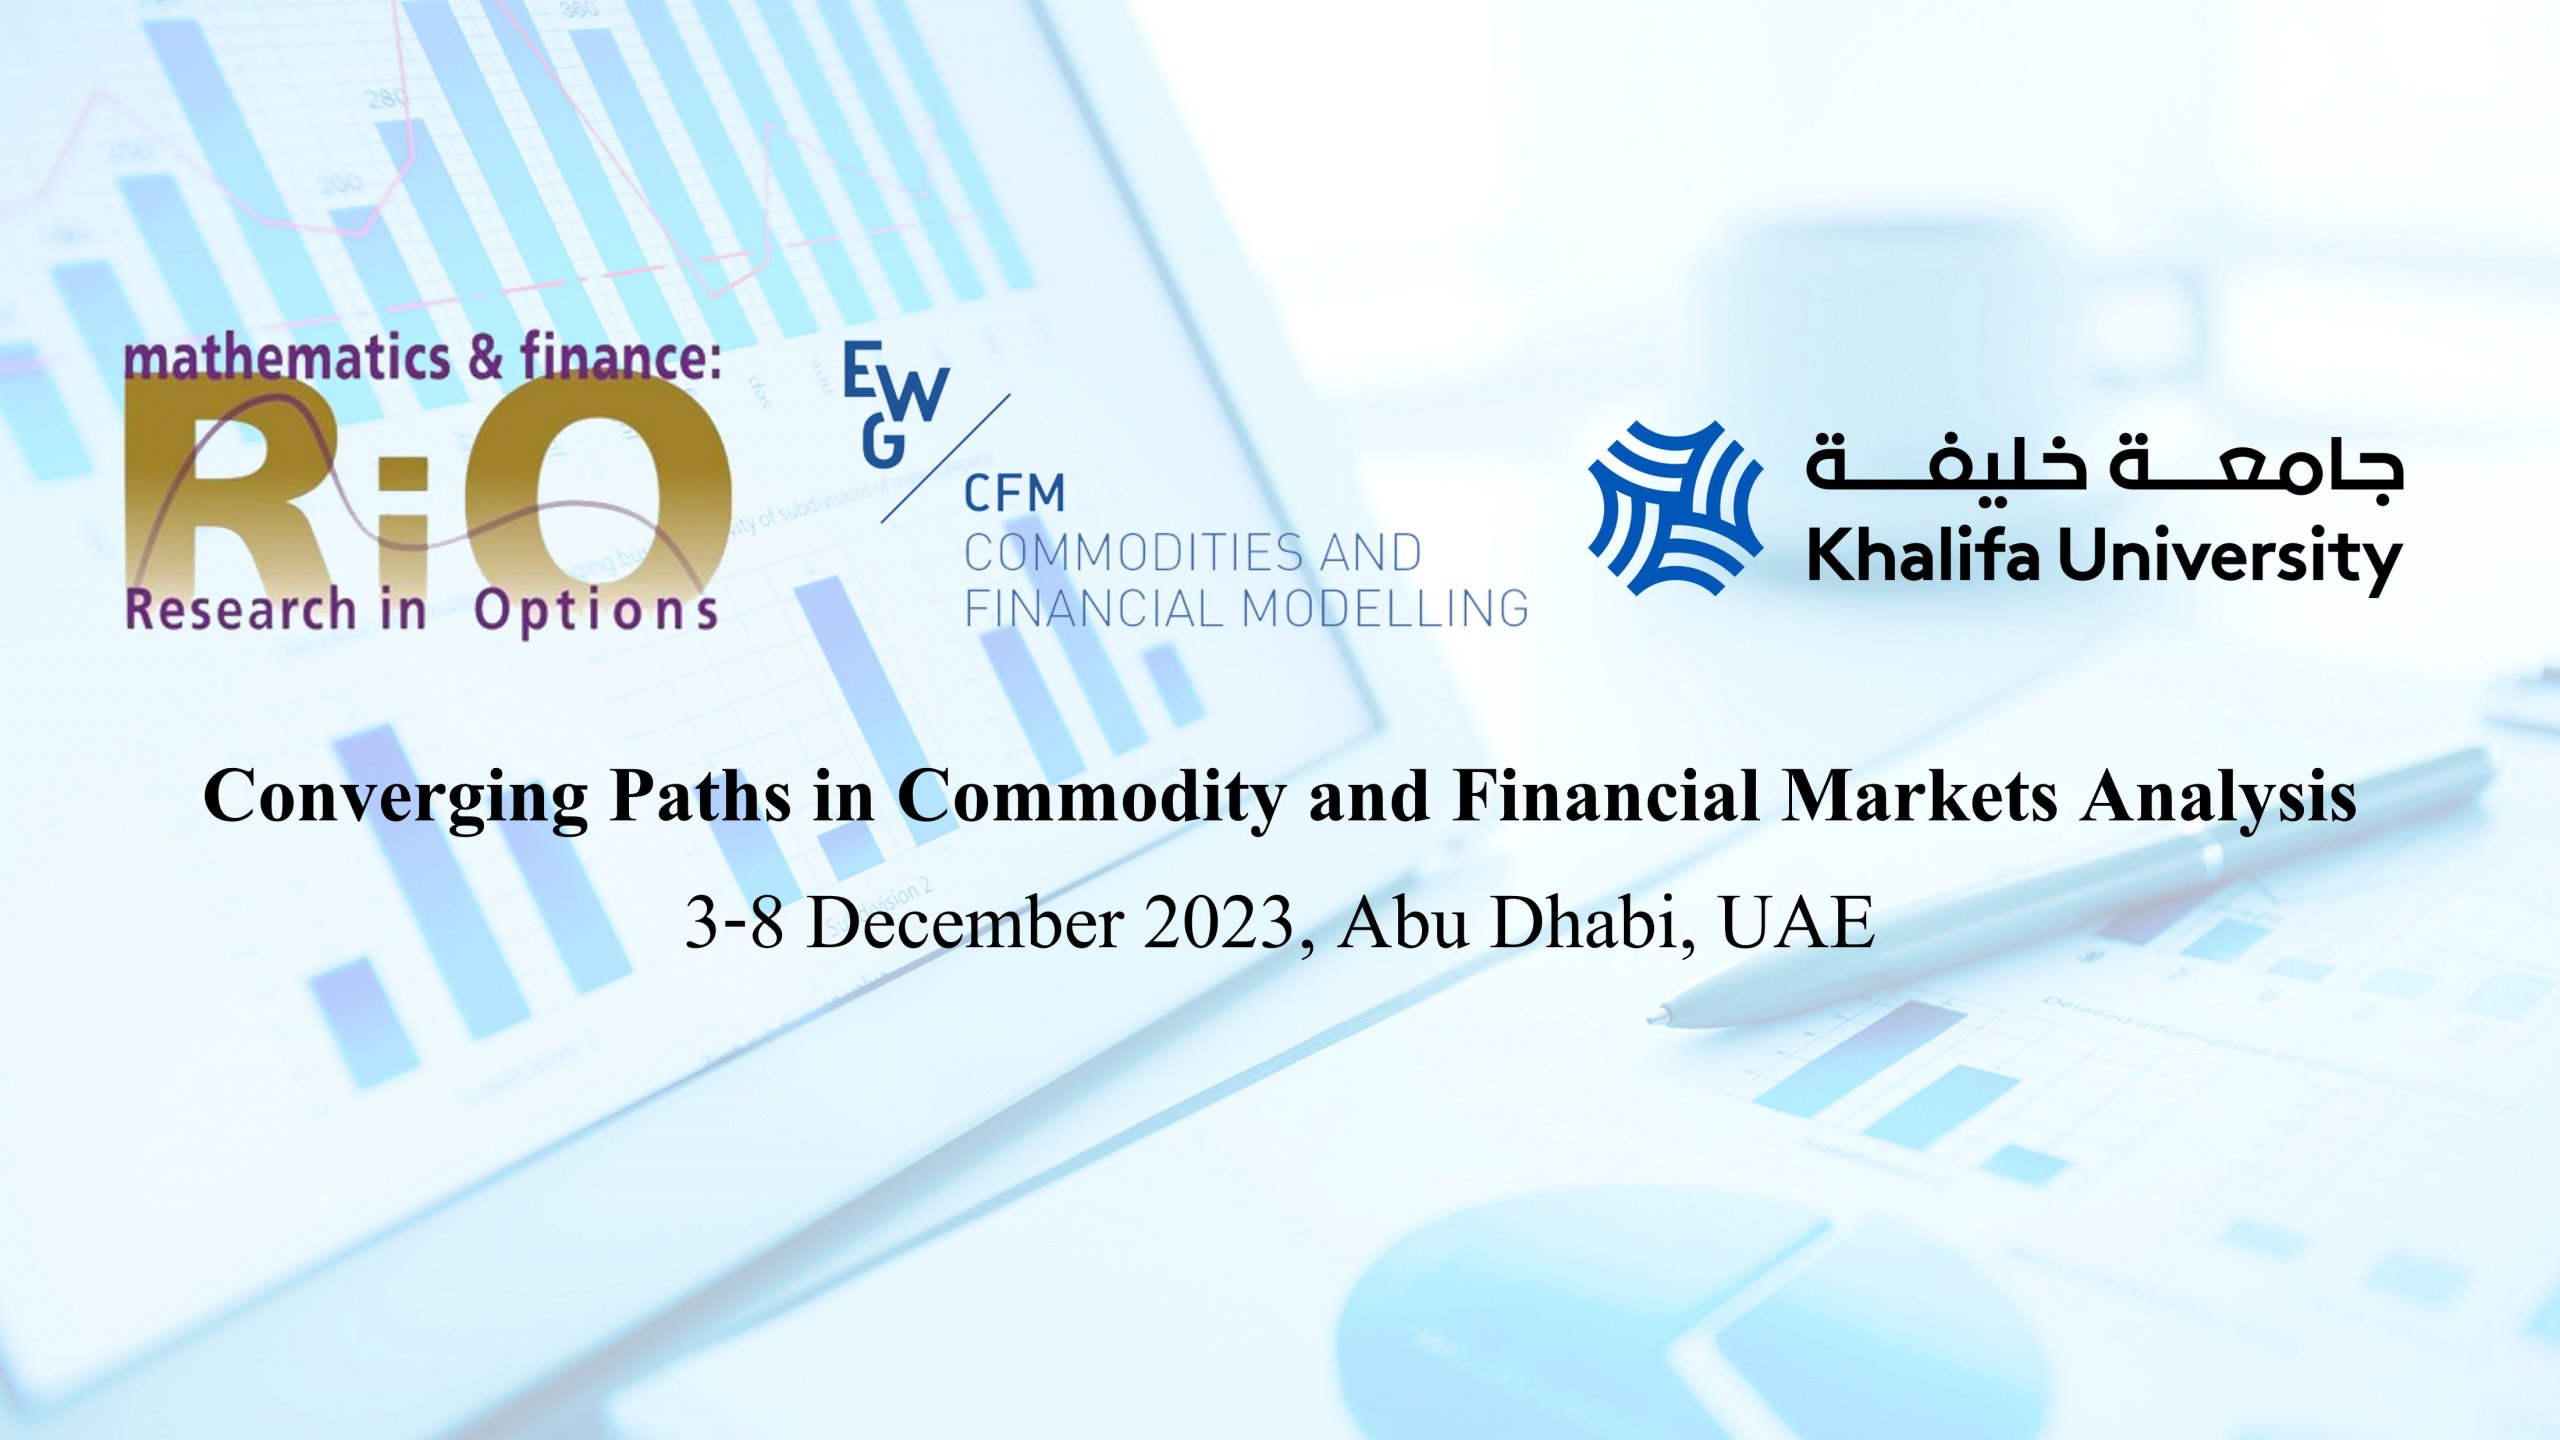 Converging Paths in Commodity and Financial Markets Analysis